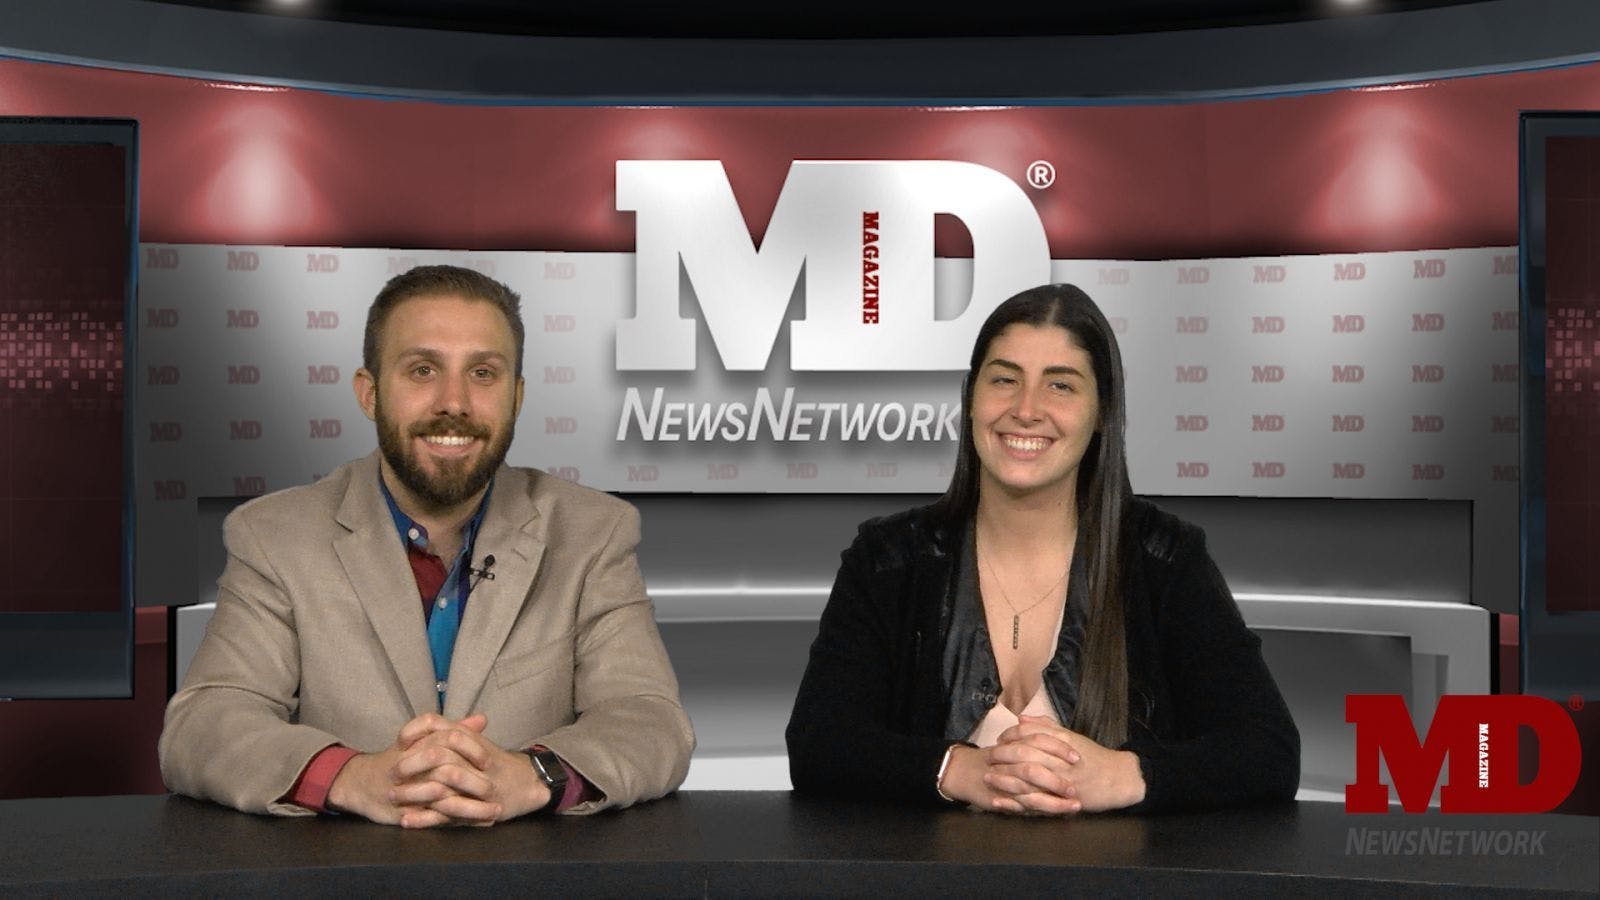 MDNN: Acetaminophen Linked to ADHD, ASD, New DMT Recommendations for MS, and Resources for Managing Burnout